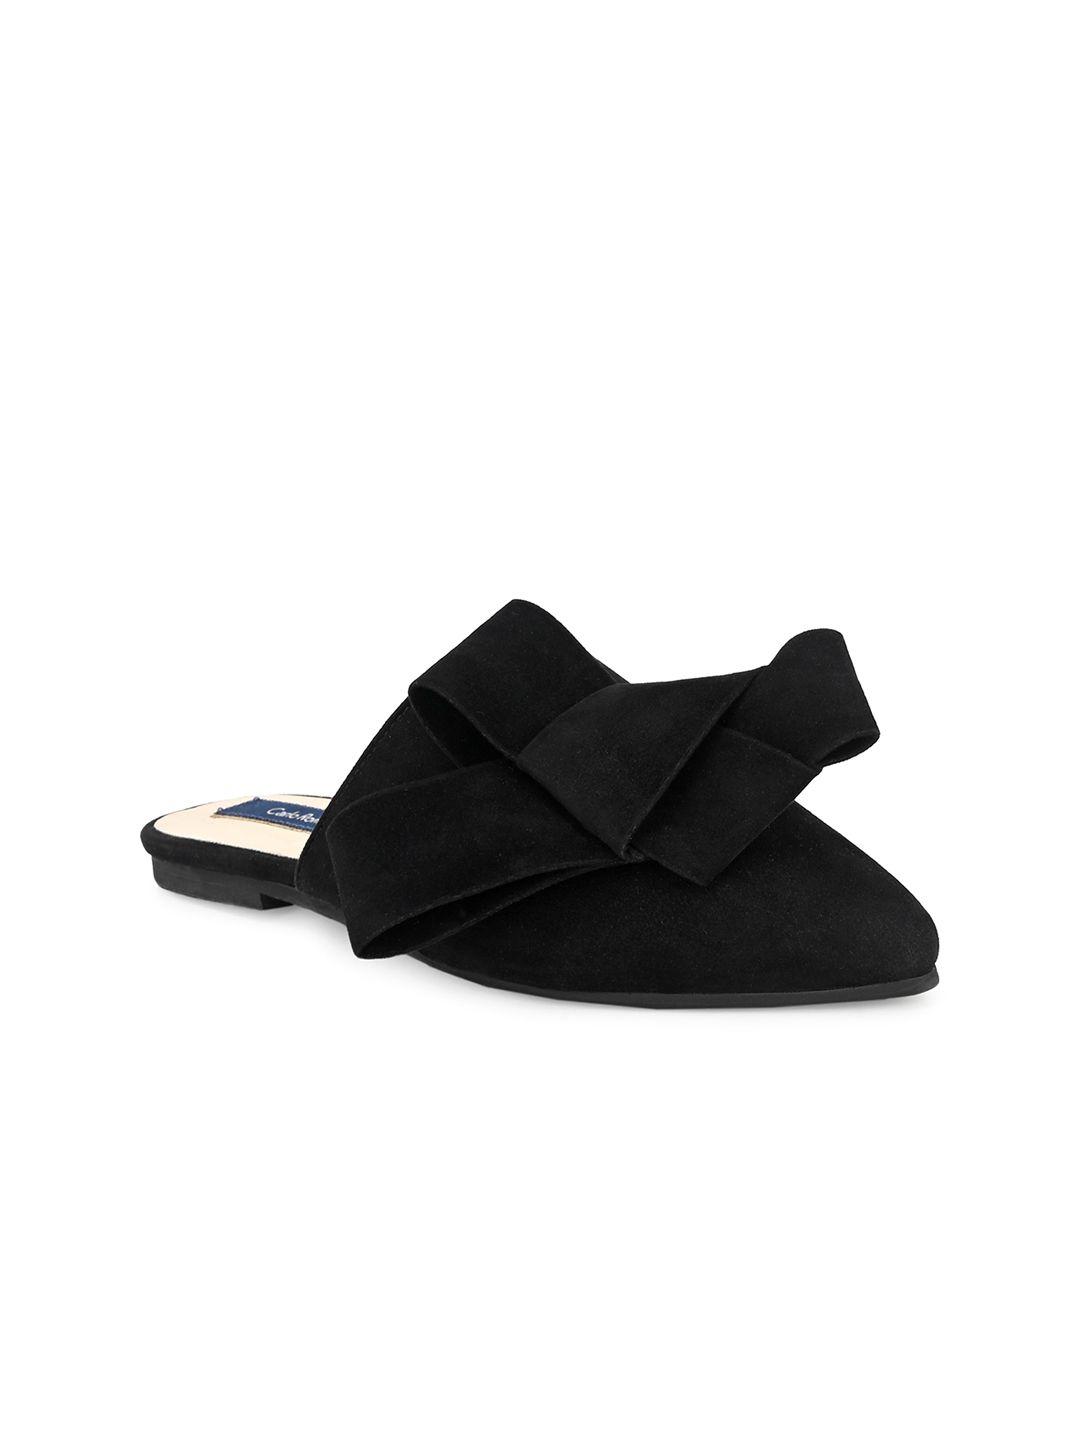 carlo romano women mules with bows flats